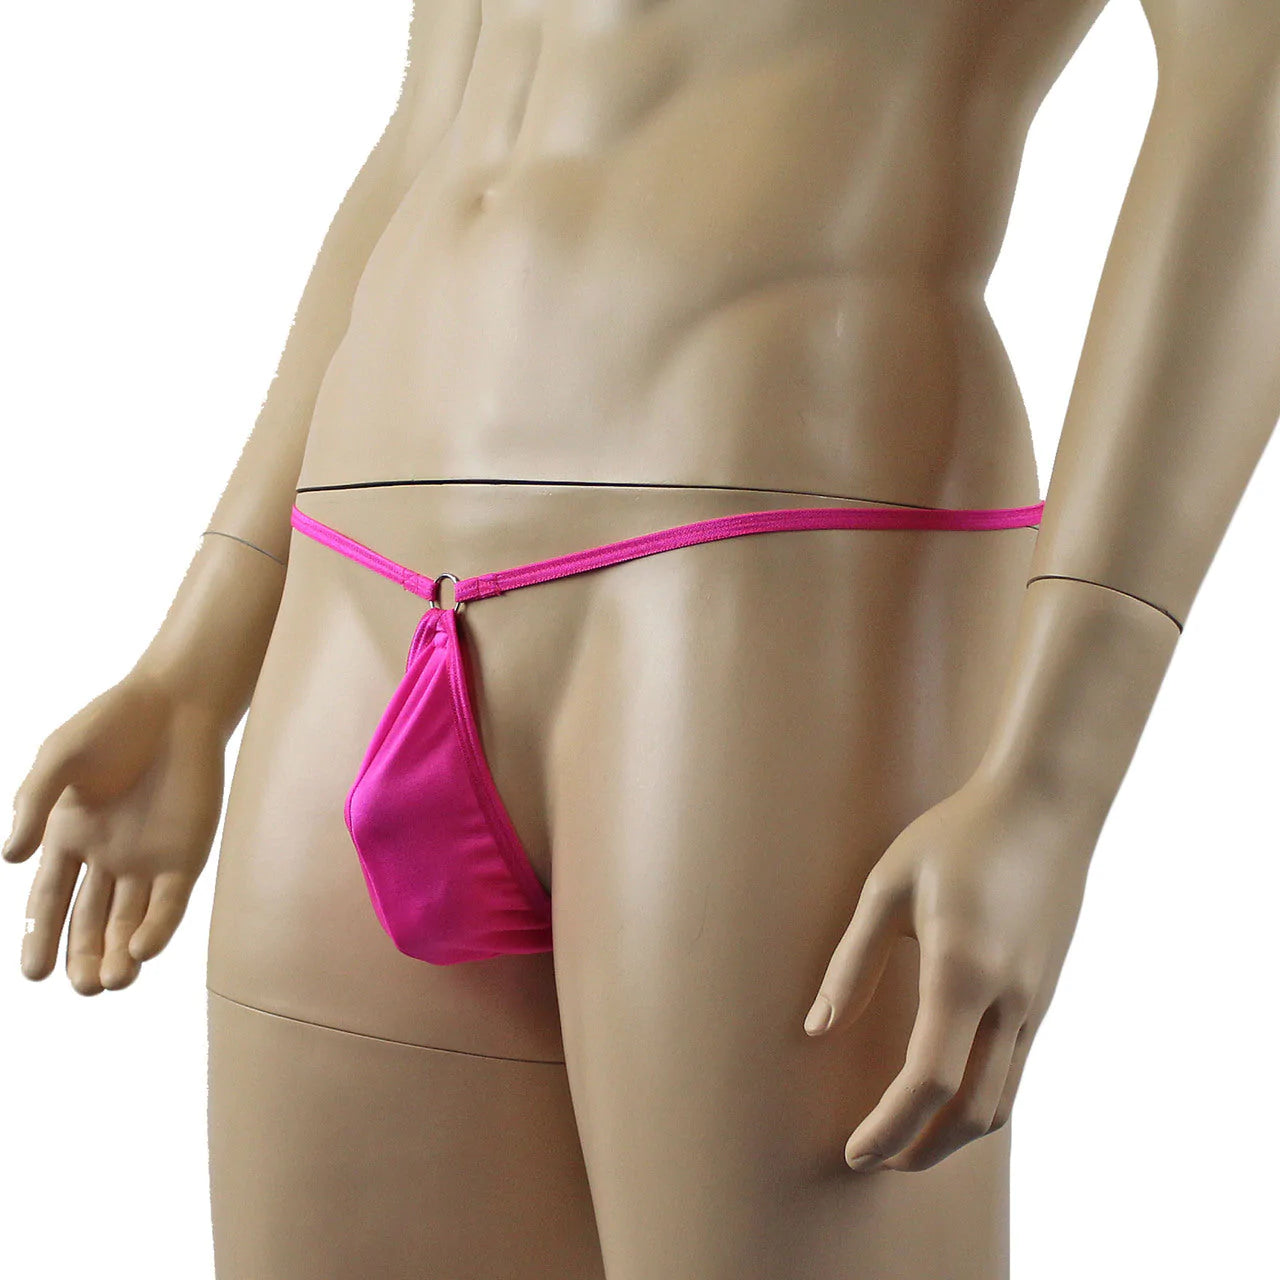 SALE - Mens Spandex Thong with Extra Wide Elastic Waistband Hot Pink